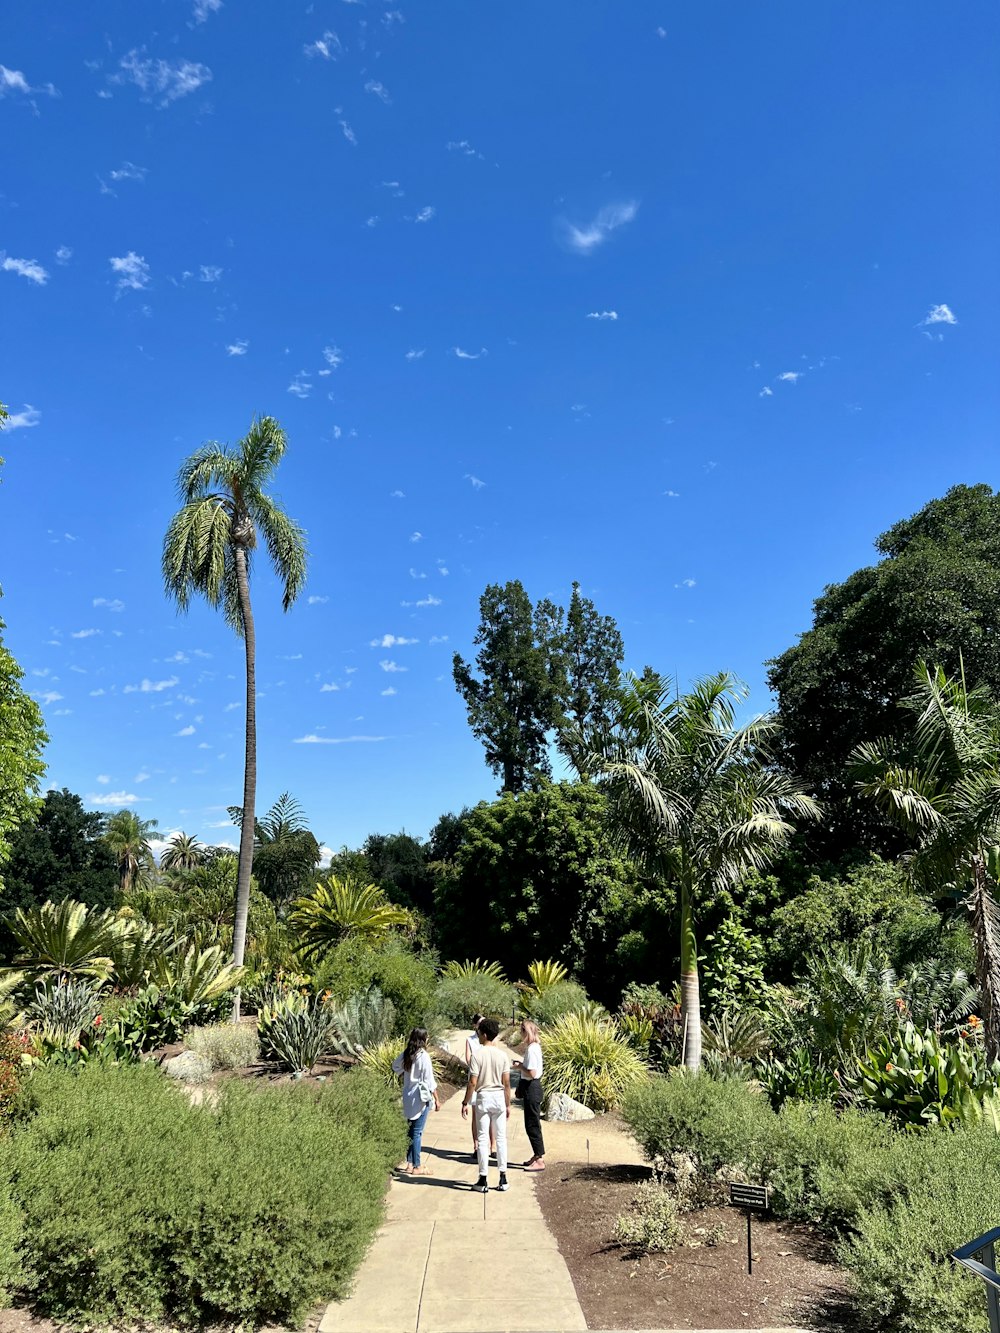 a group of people walking on a path through a tropical area